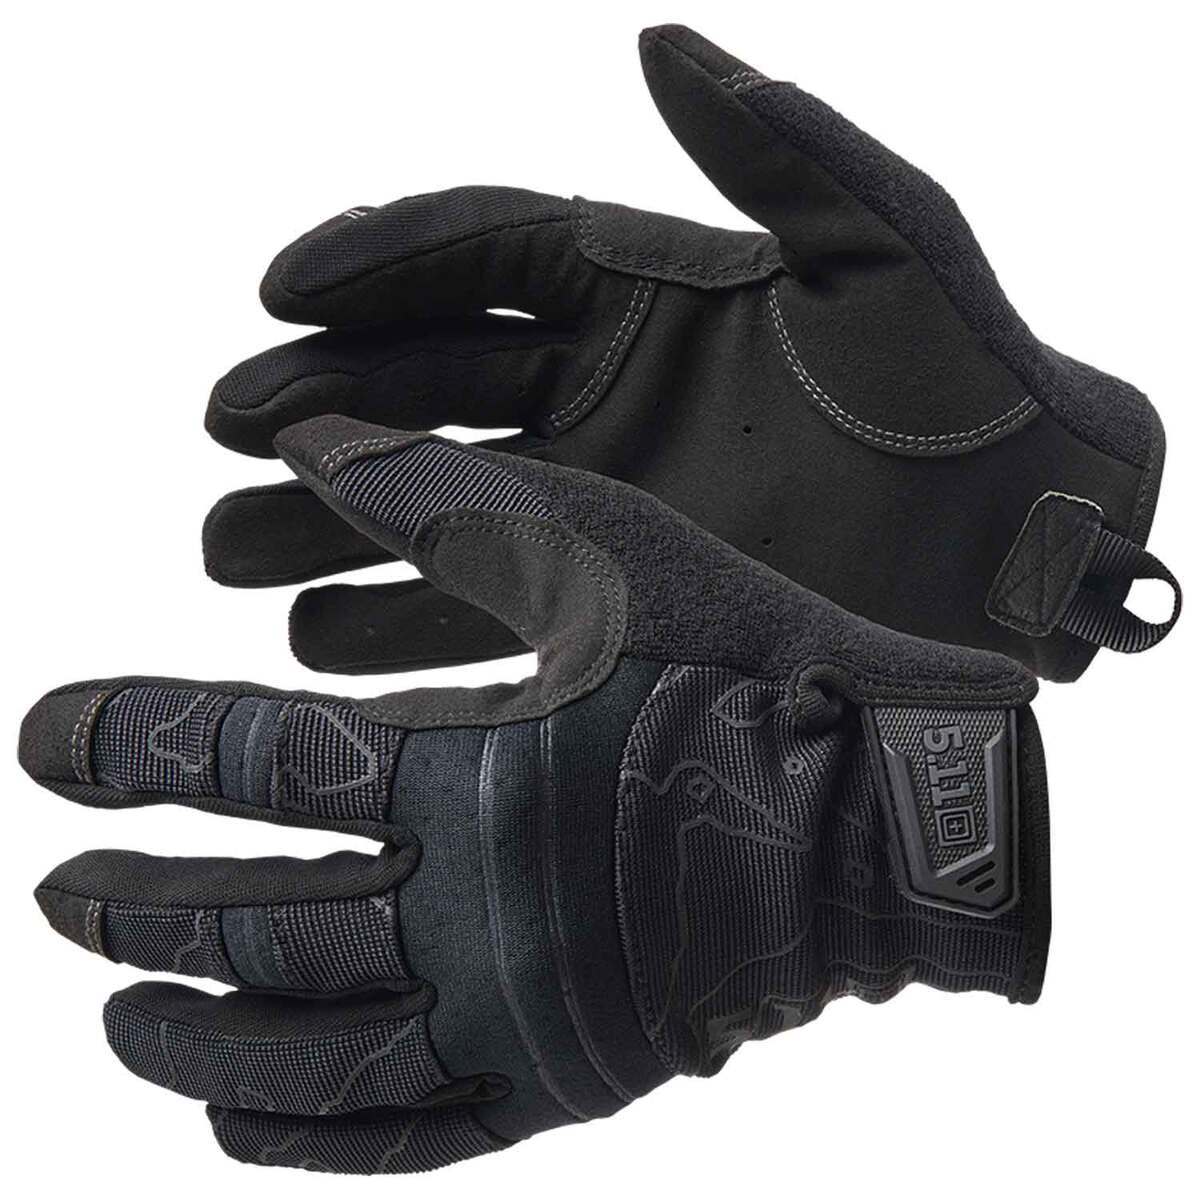 5.11 Tactical Competition Shooting 2.0 Gloves - Black - L